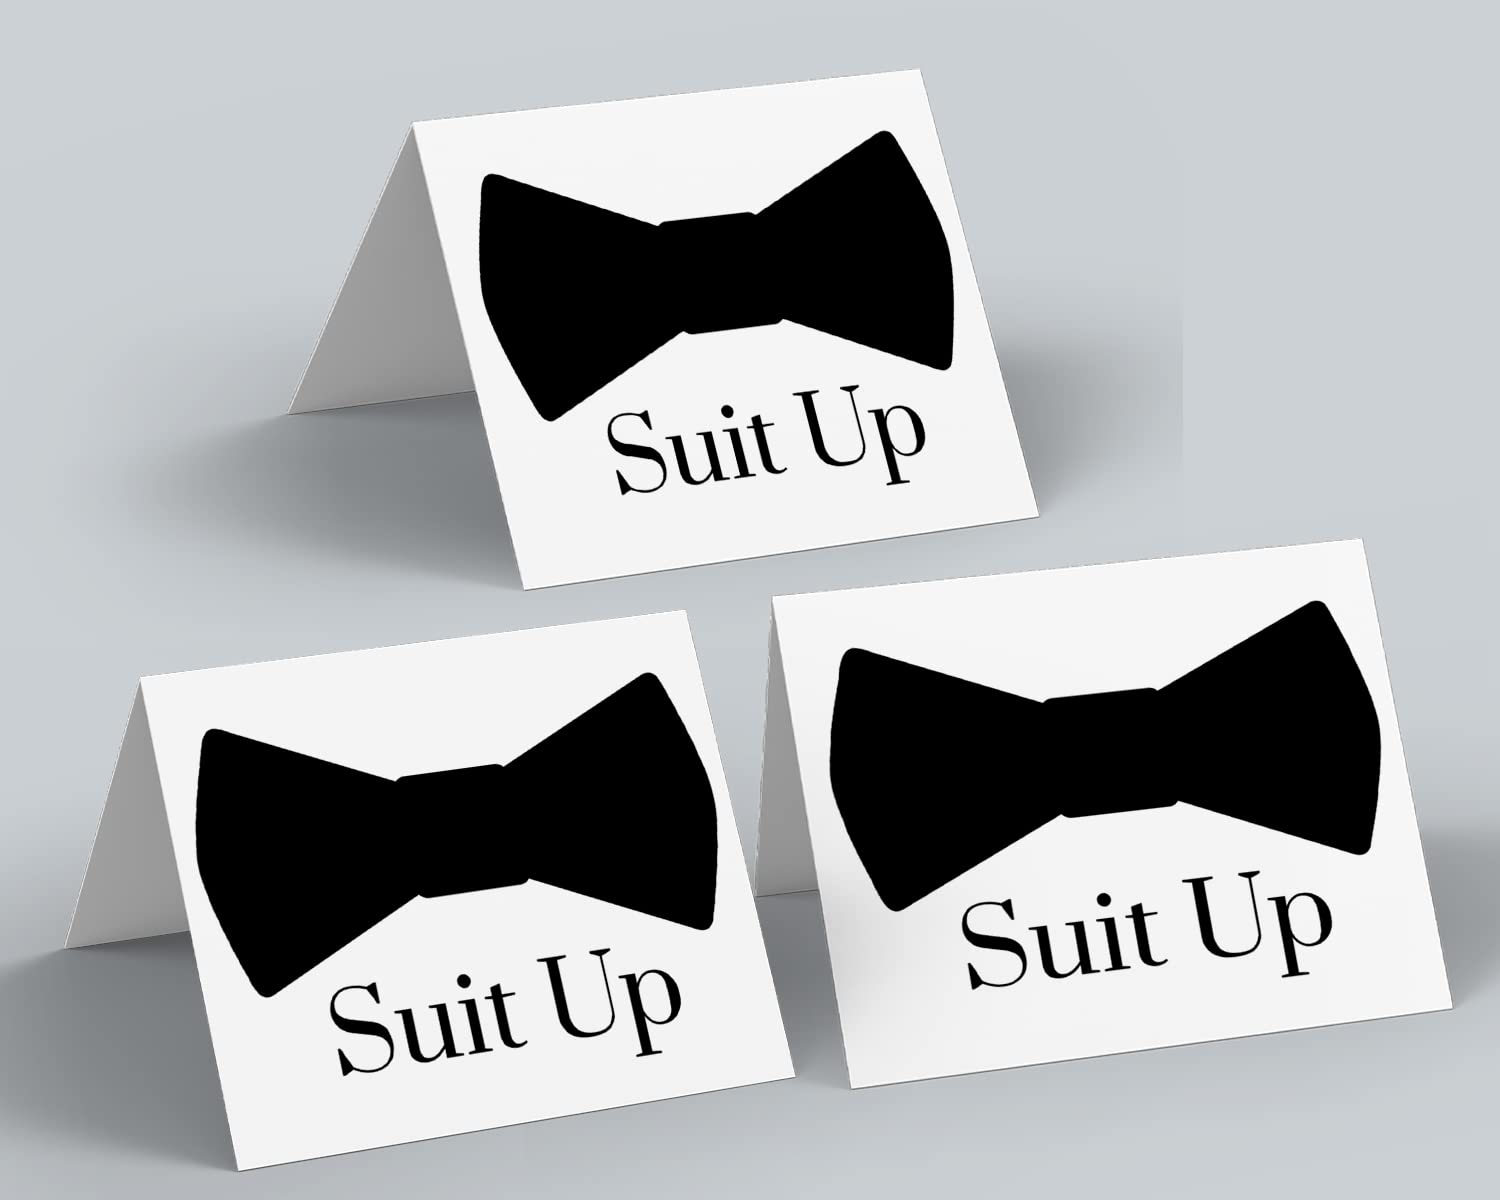 Man Ushers, Bridal Party, Multi-Paper Clever Party